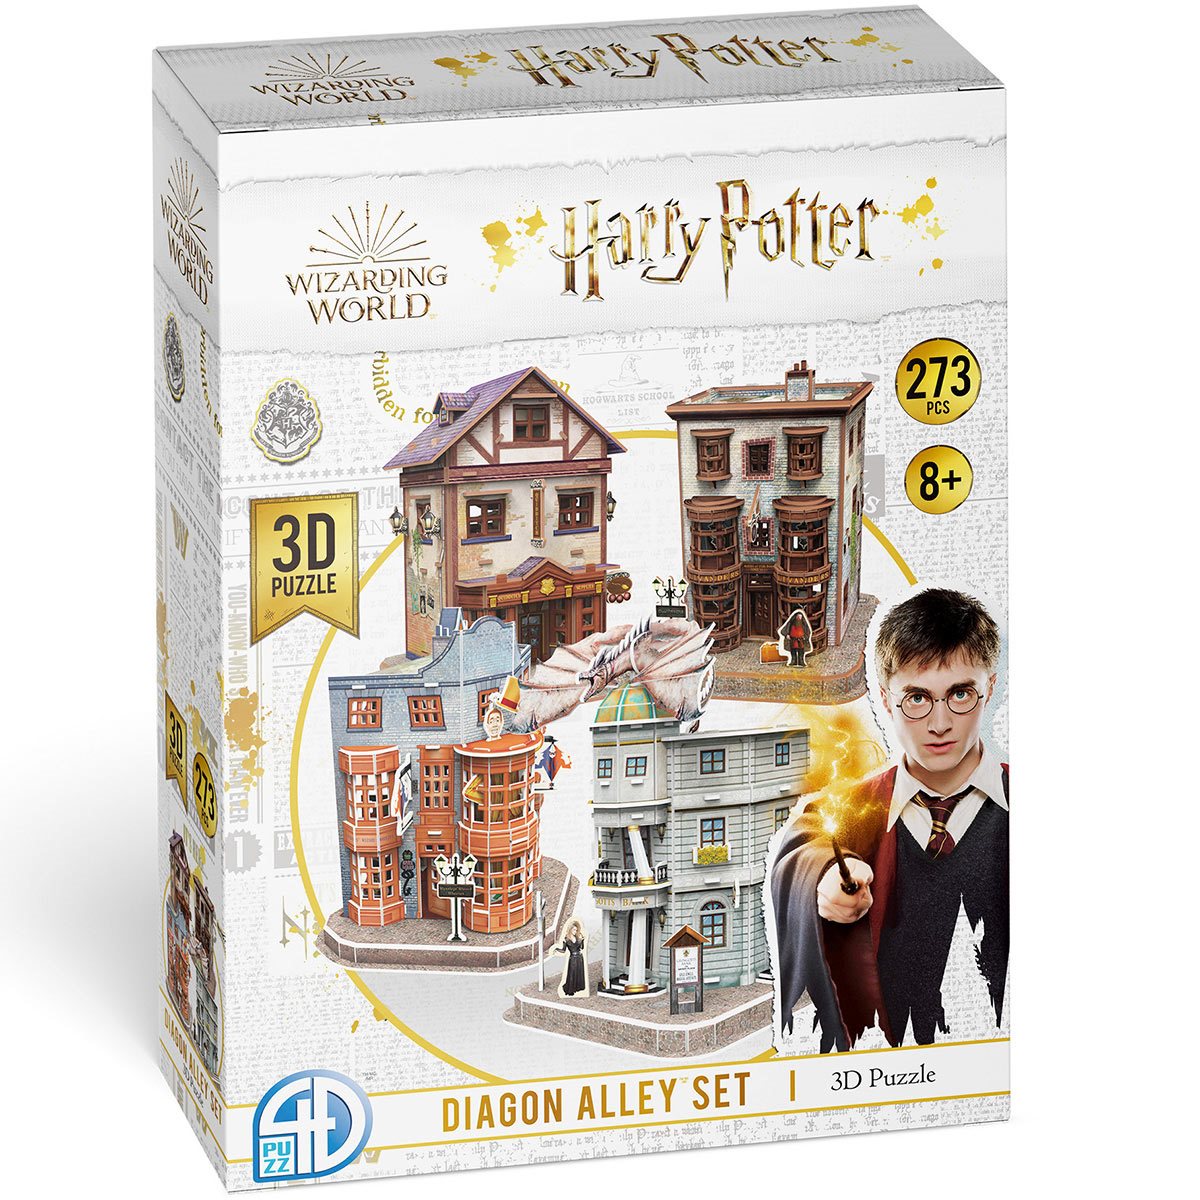 Wizarding World 51066 Harry Potter Diagon Alley 3D Model Puzzle Kit